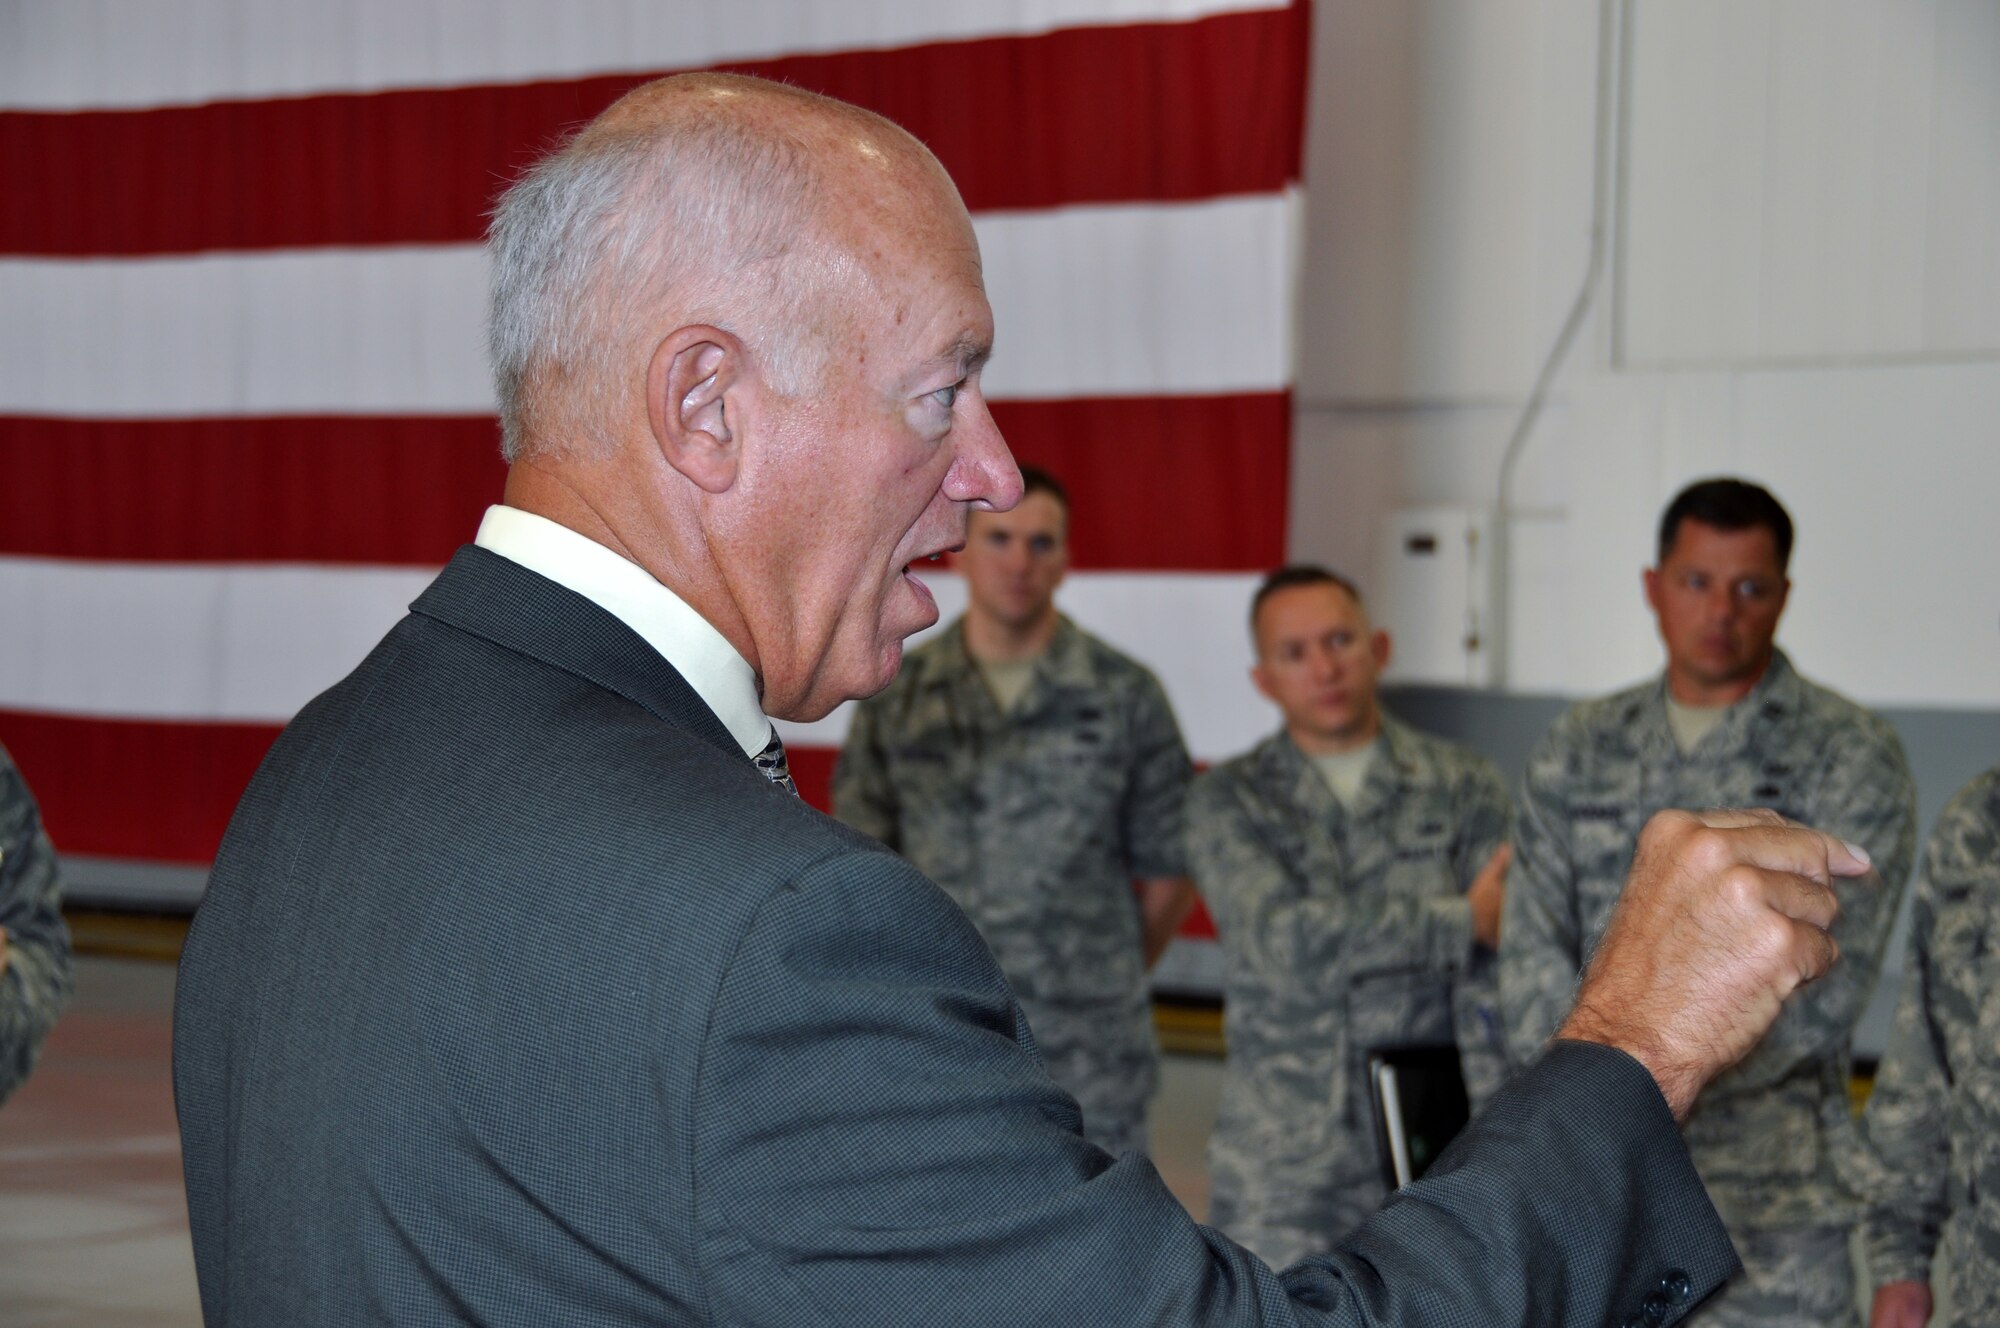 Former Oklahoma Adjutant General, retired Air Force Lt. Gen. General Harry (Bud) M. Wyatt addresses reservists and guardsmen here as part of the National Commission on the Structure of the Air Force site visit.  Wyatt along with retired Marine Corps Lt. Gen. Dennis M. McCarthy, retired Air Force Gen. Raymond E. Johns Jr., and Dr. Janine A. Davidson visited Tinker Air Force Base to get input and perspectives from Airmen in the field on how best to shape the future force. (U.S. Air Force photo/Senior Airman Mark Hybers)